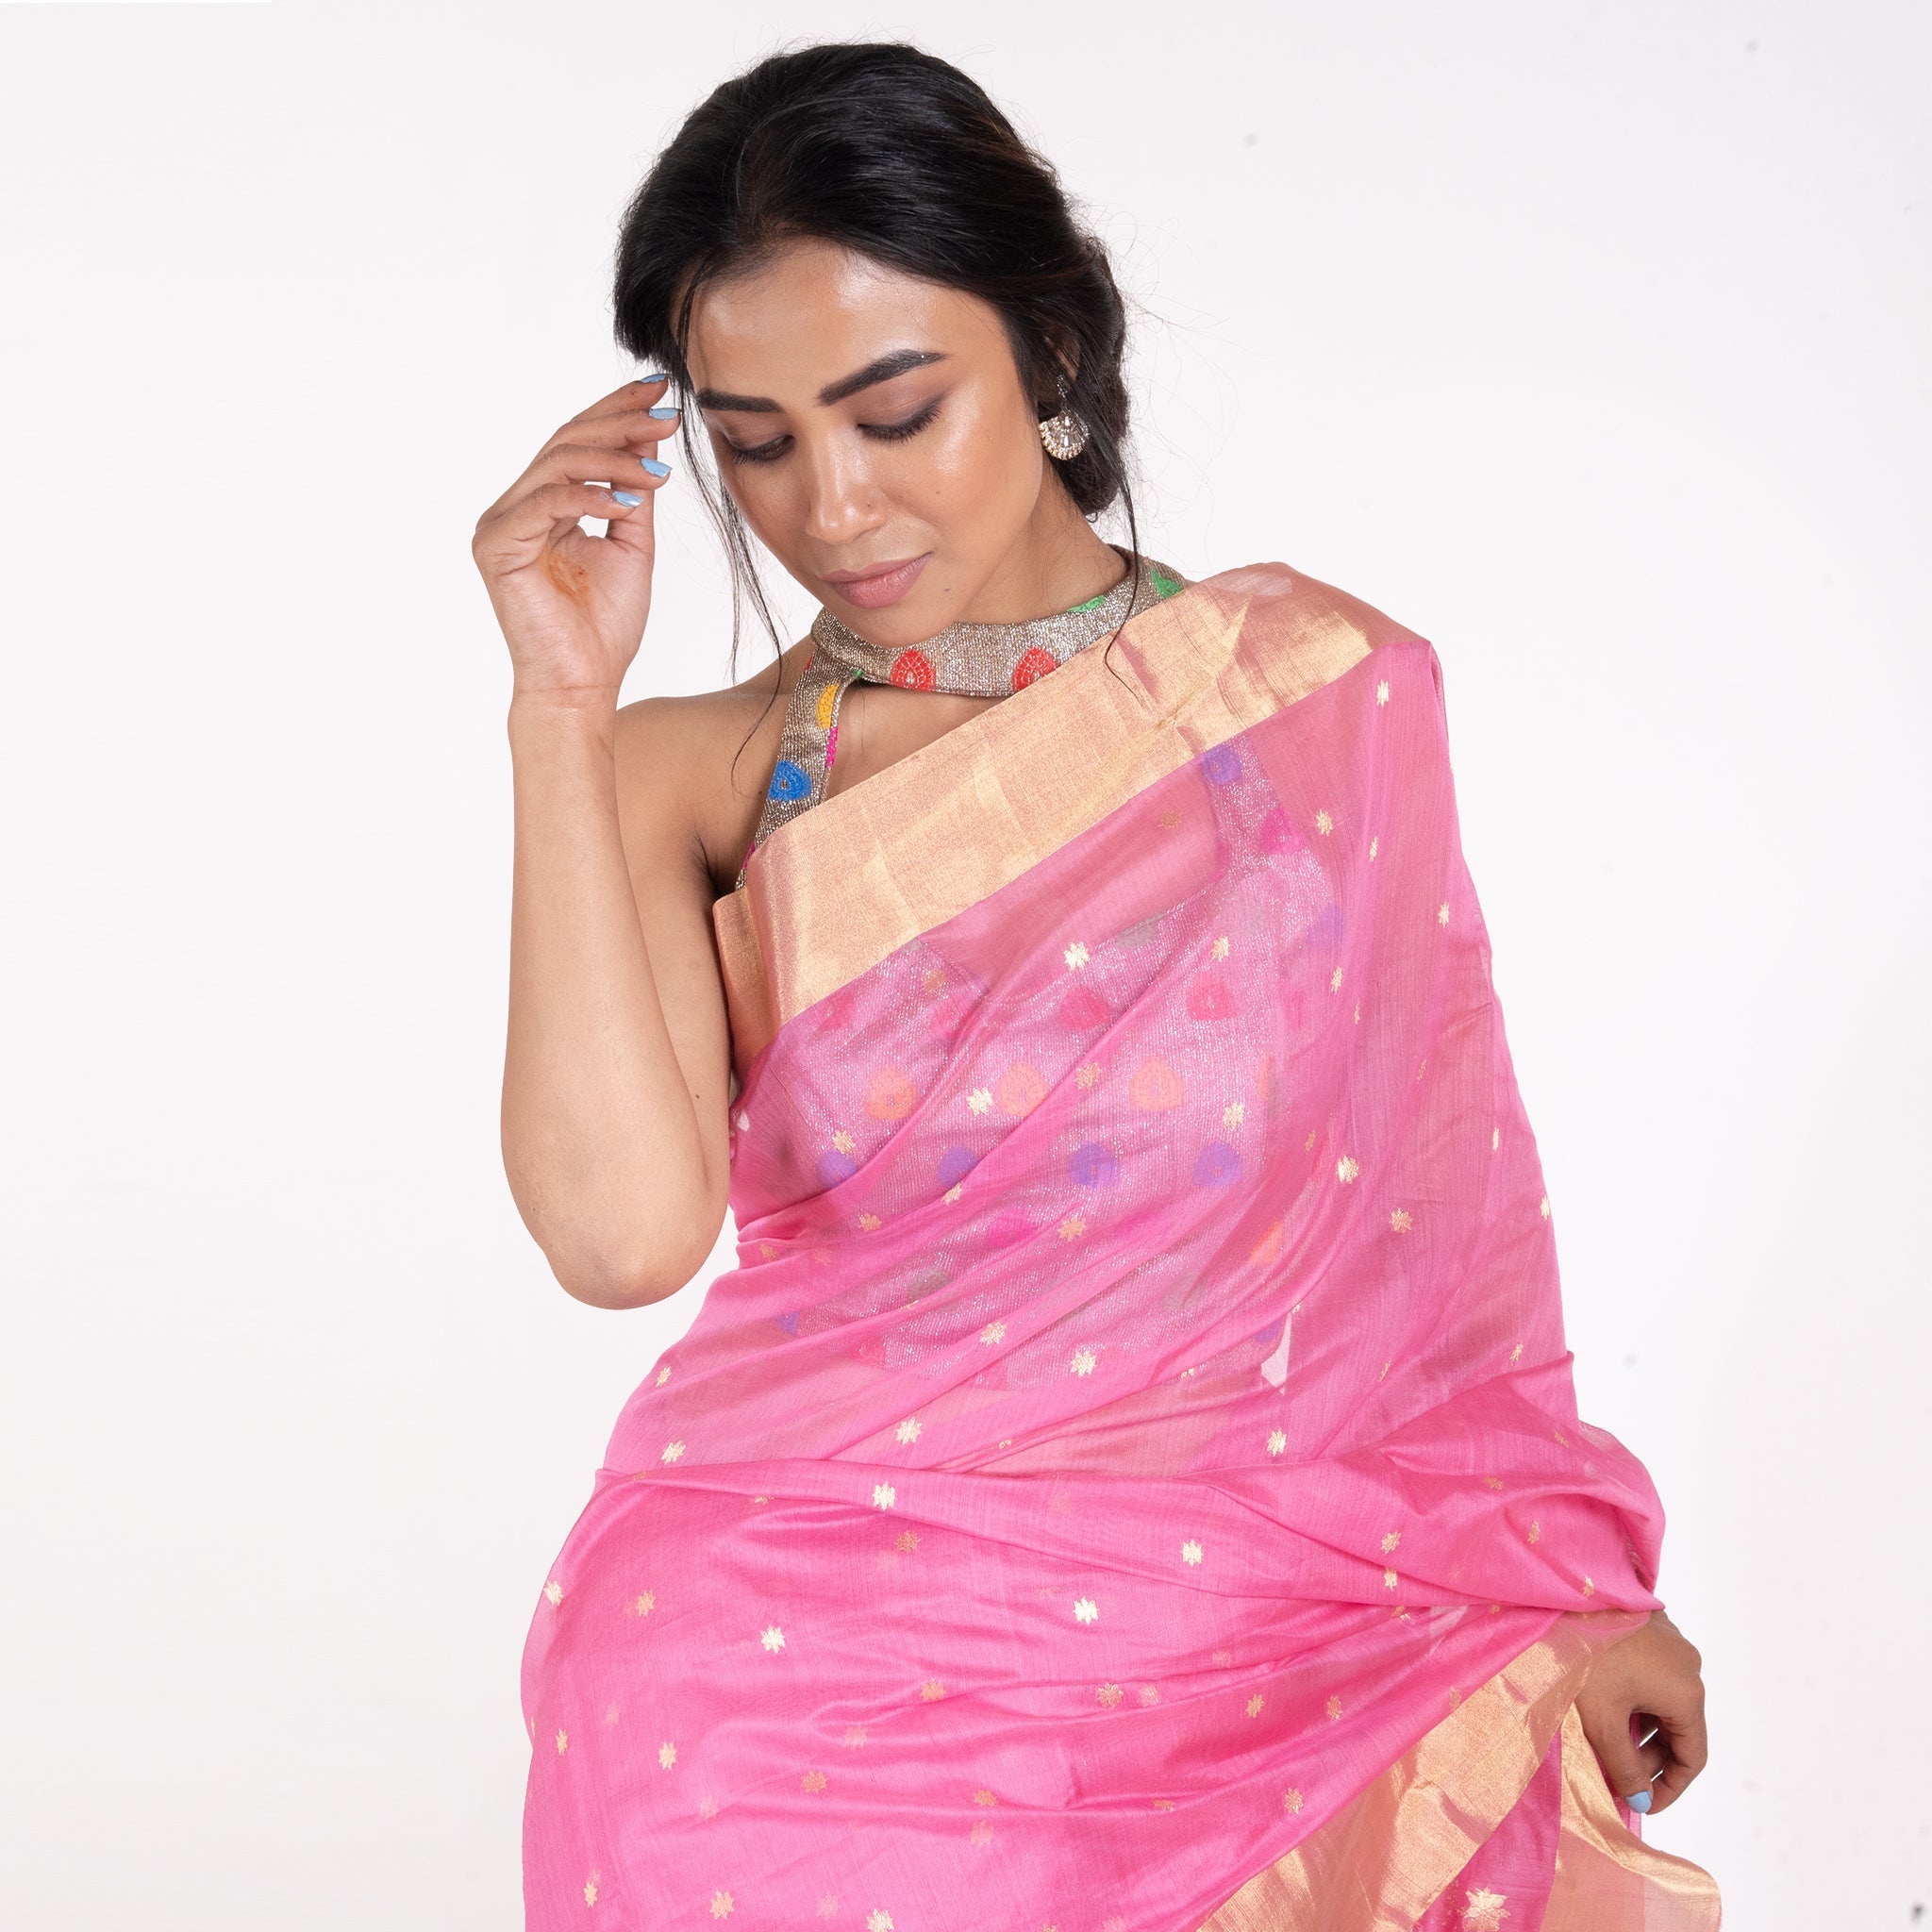 Women's Coral Pink Pure Chanderi Silk Saree With Contrasting Border And Booti - Boveee